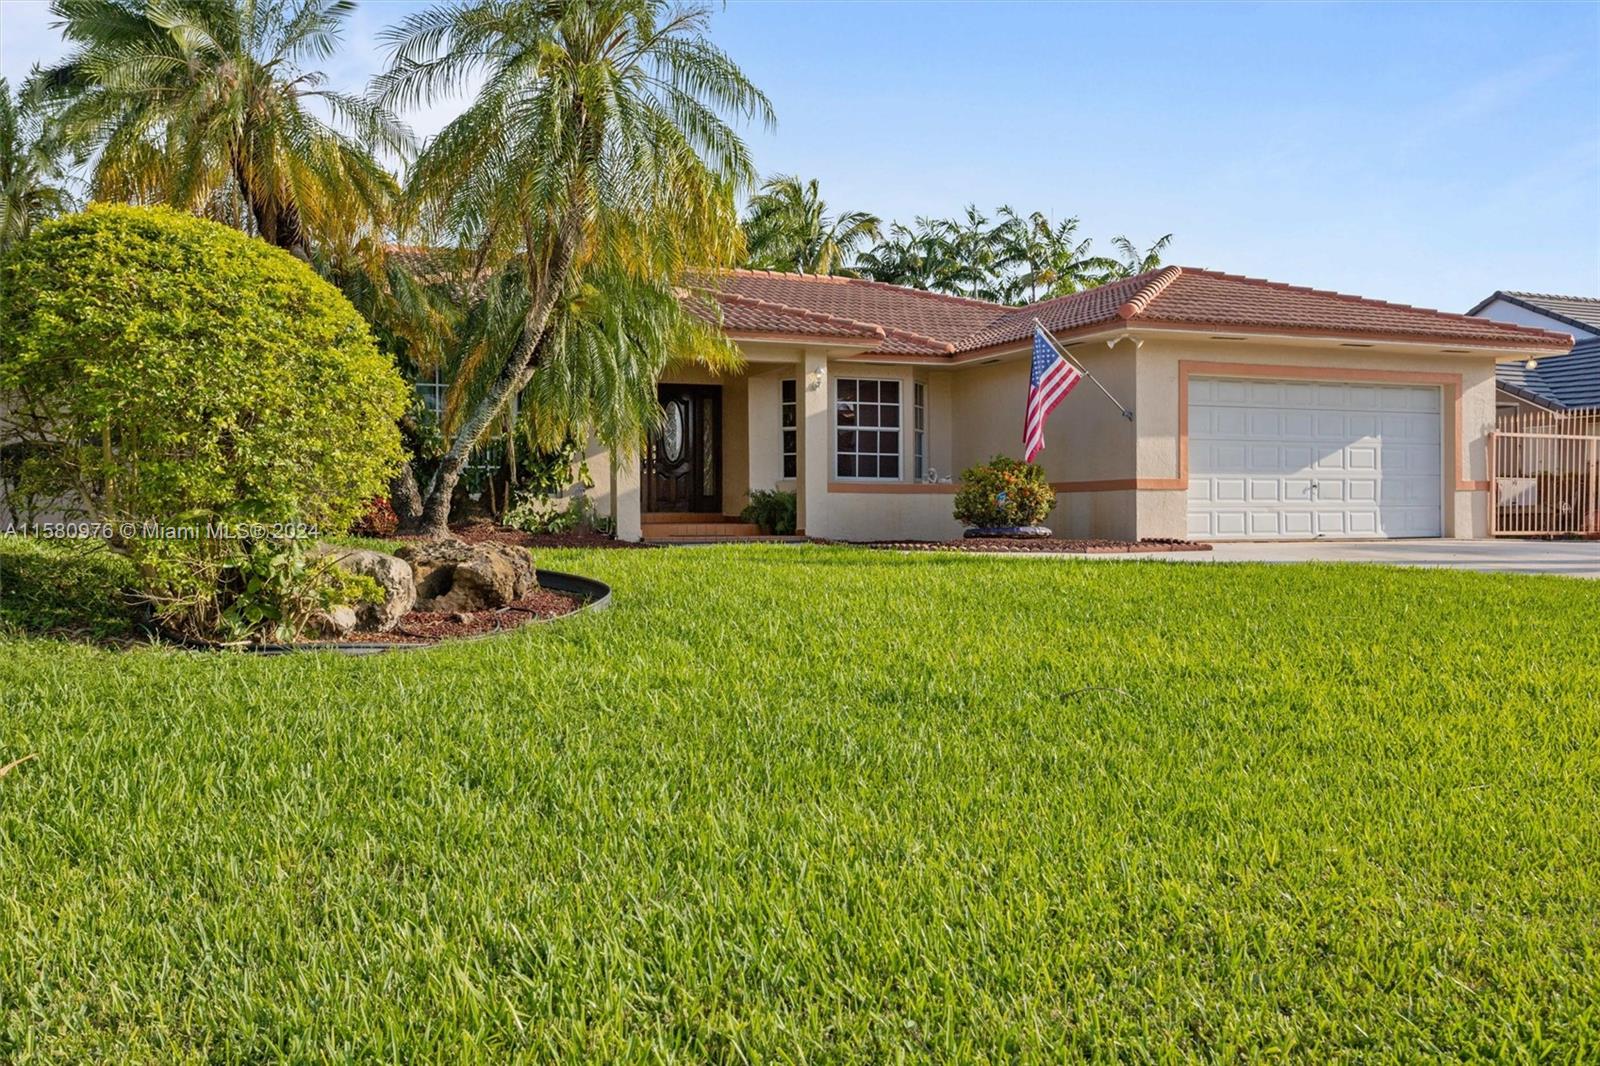 Property for Sale at 10440 Nw 131st St St, Hialeah Gardens, Miami-Dade County, Florida - Bedrooms: 4 
Bathrooms: 3  - $1,450,000